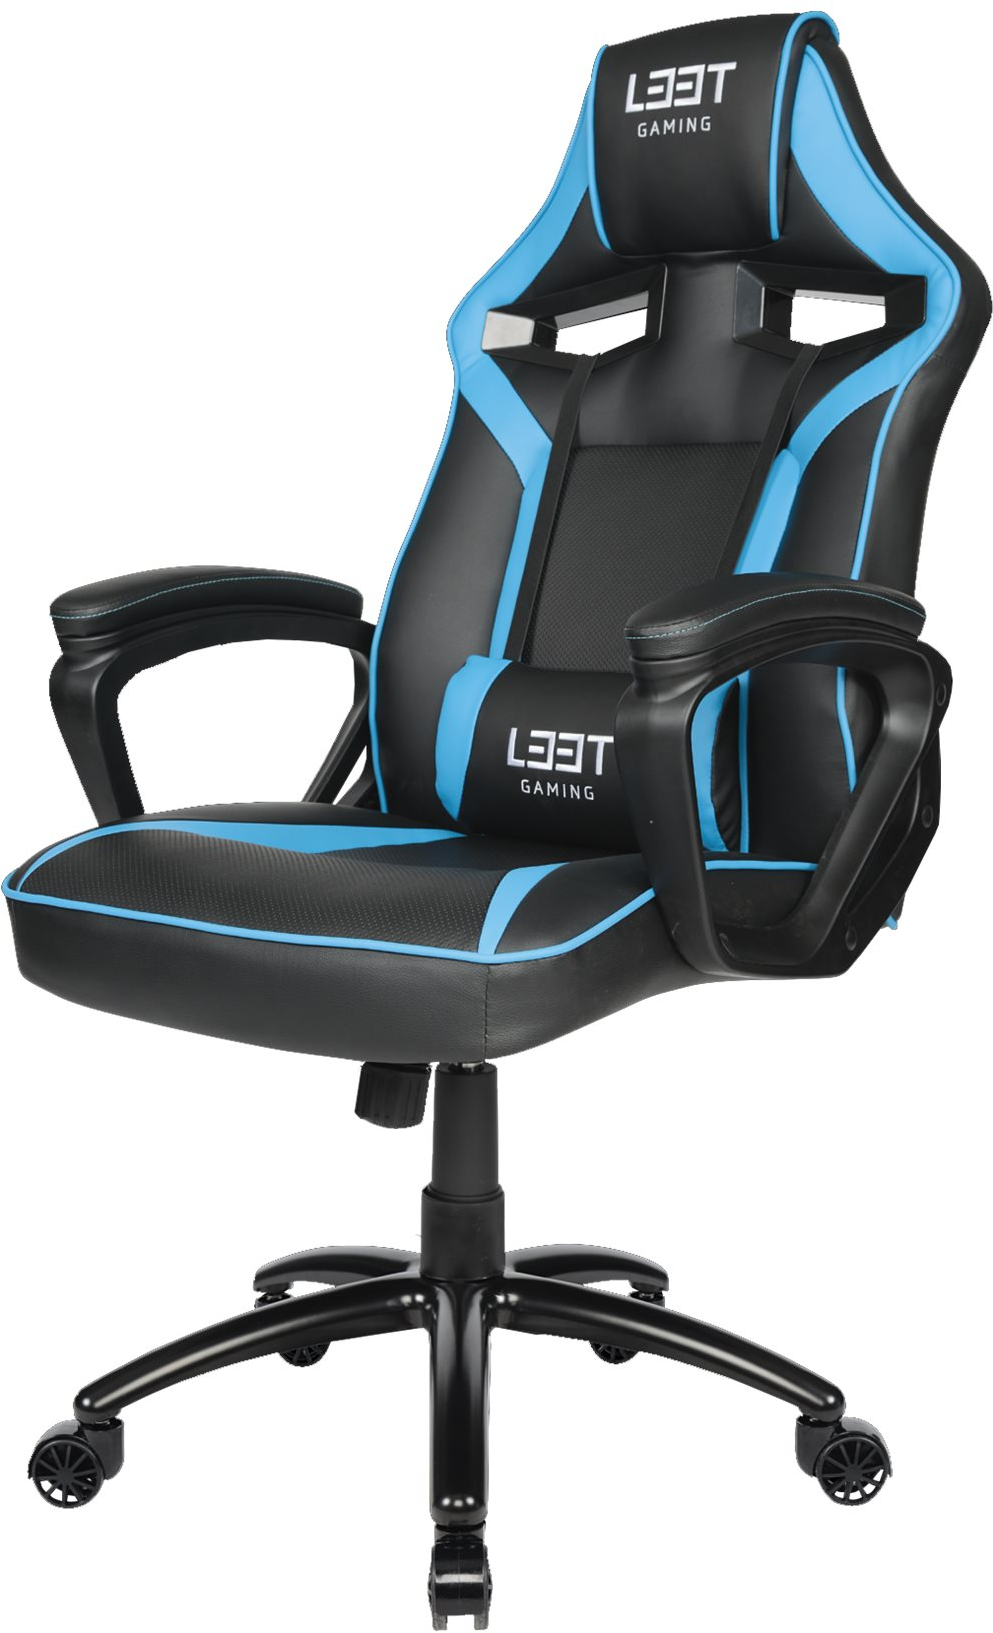 5706470075481 L33T Extreme Gaming stol - blå - Gaming stol Computer & IT,Gaming,Gaming stole 74600160566 EXTR-BLUE